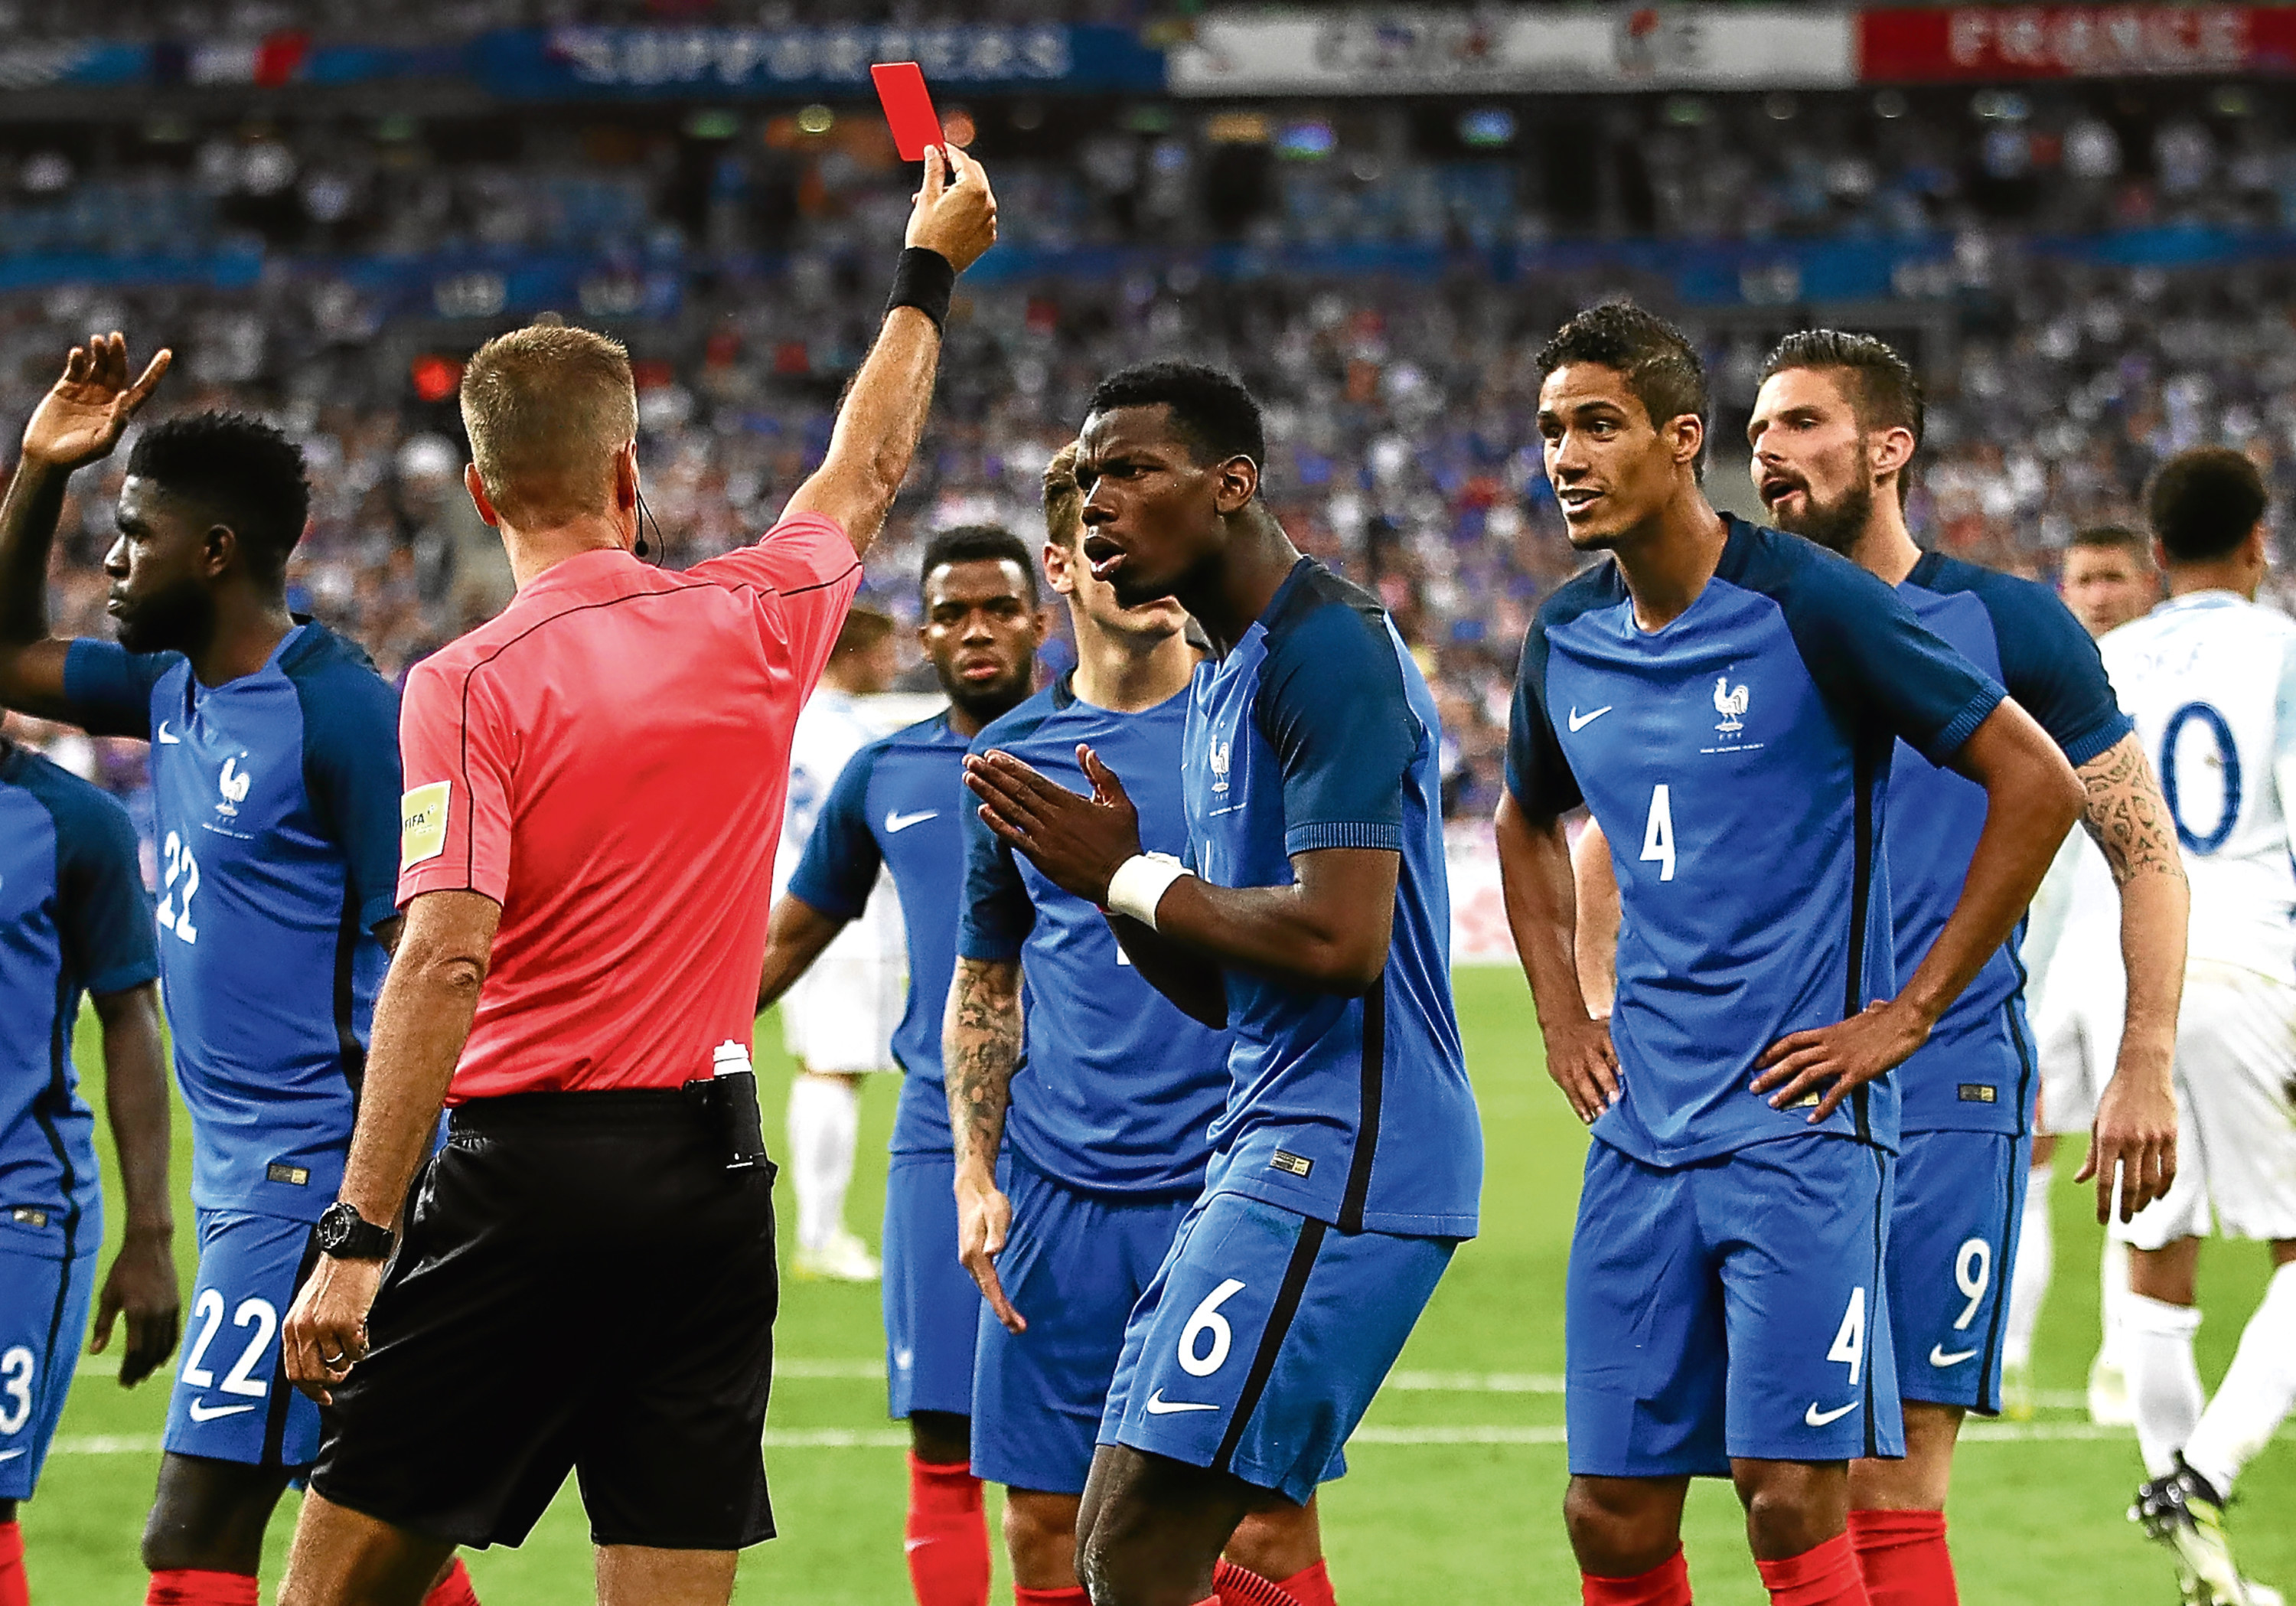 Paul Pogba reacts as Raphael Varane is shown the red card in the Stade de France (Julian Finney / Getty Images)